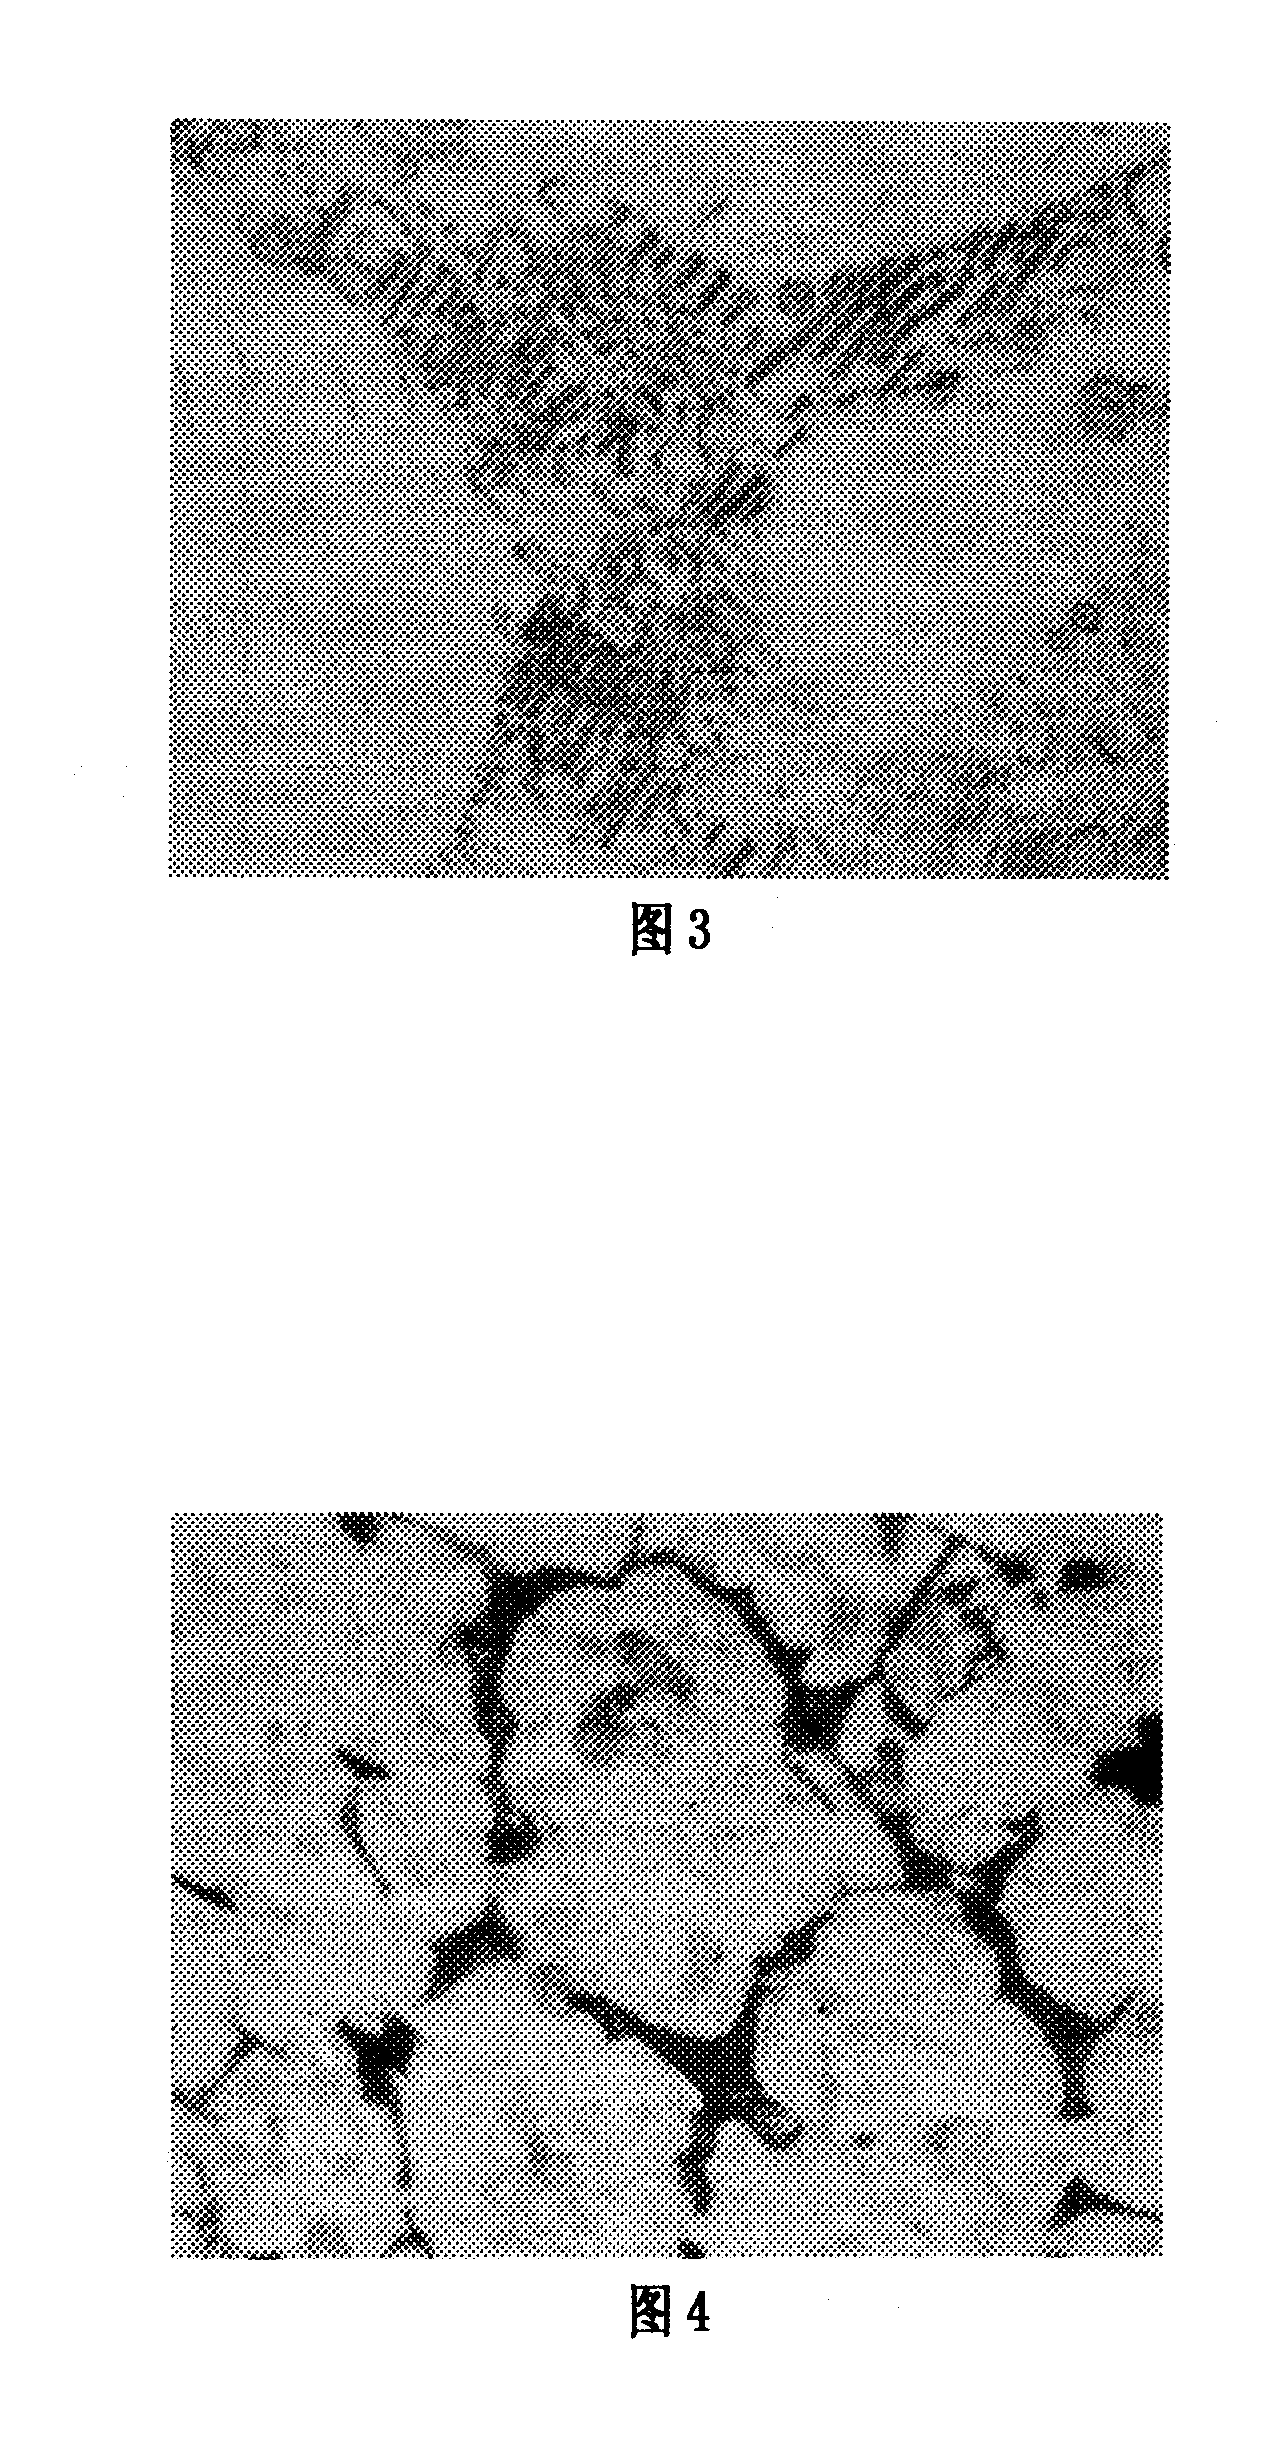 Method for synthesizing magnesium-silicon intermediate and preparation of high-magnesium aluminum alloy thereby